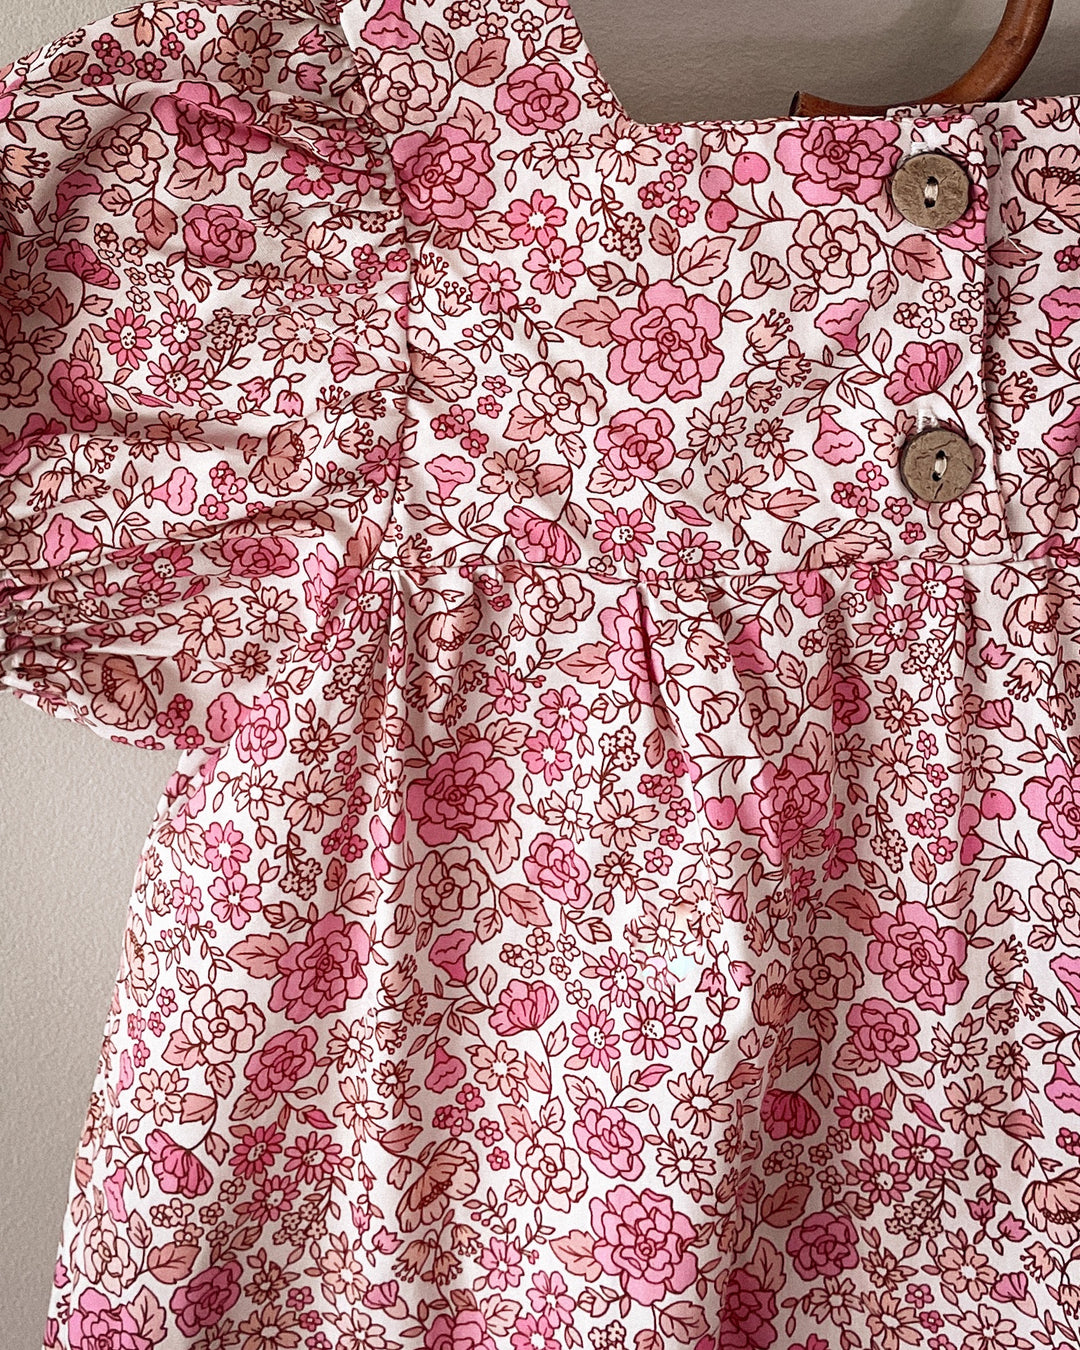 Organic Cotton Puff Sleeve Dress in Dahlia Pink Floral